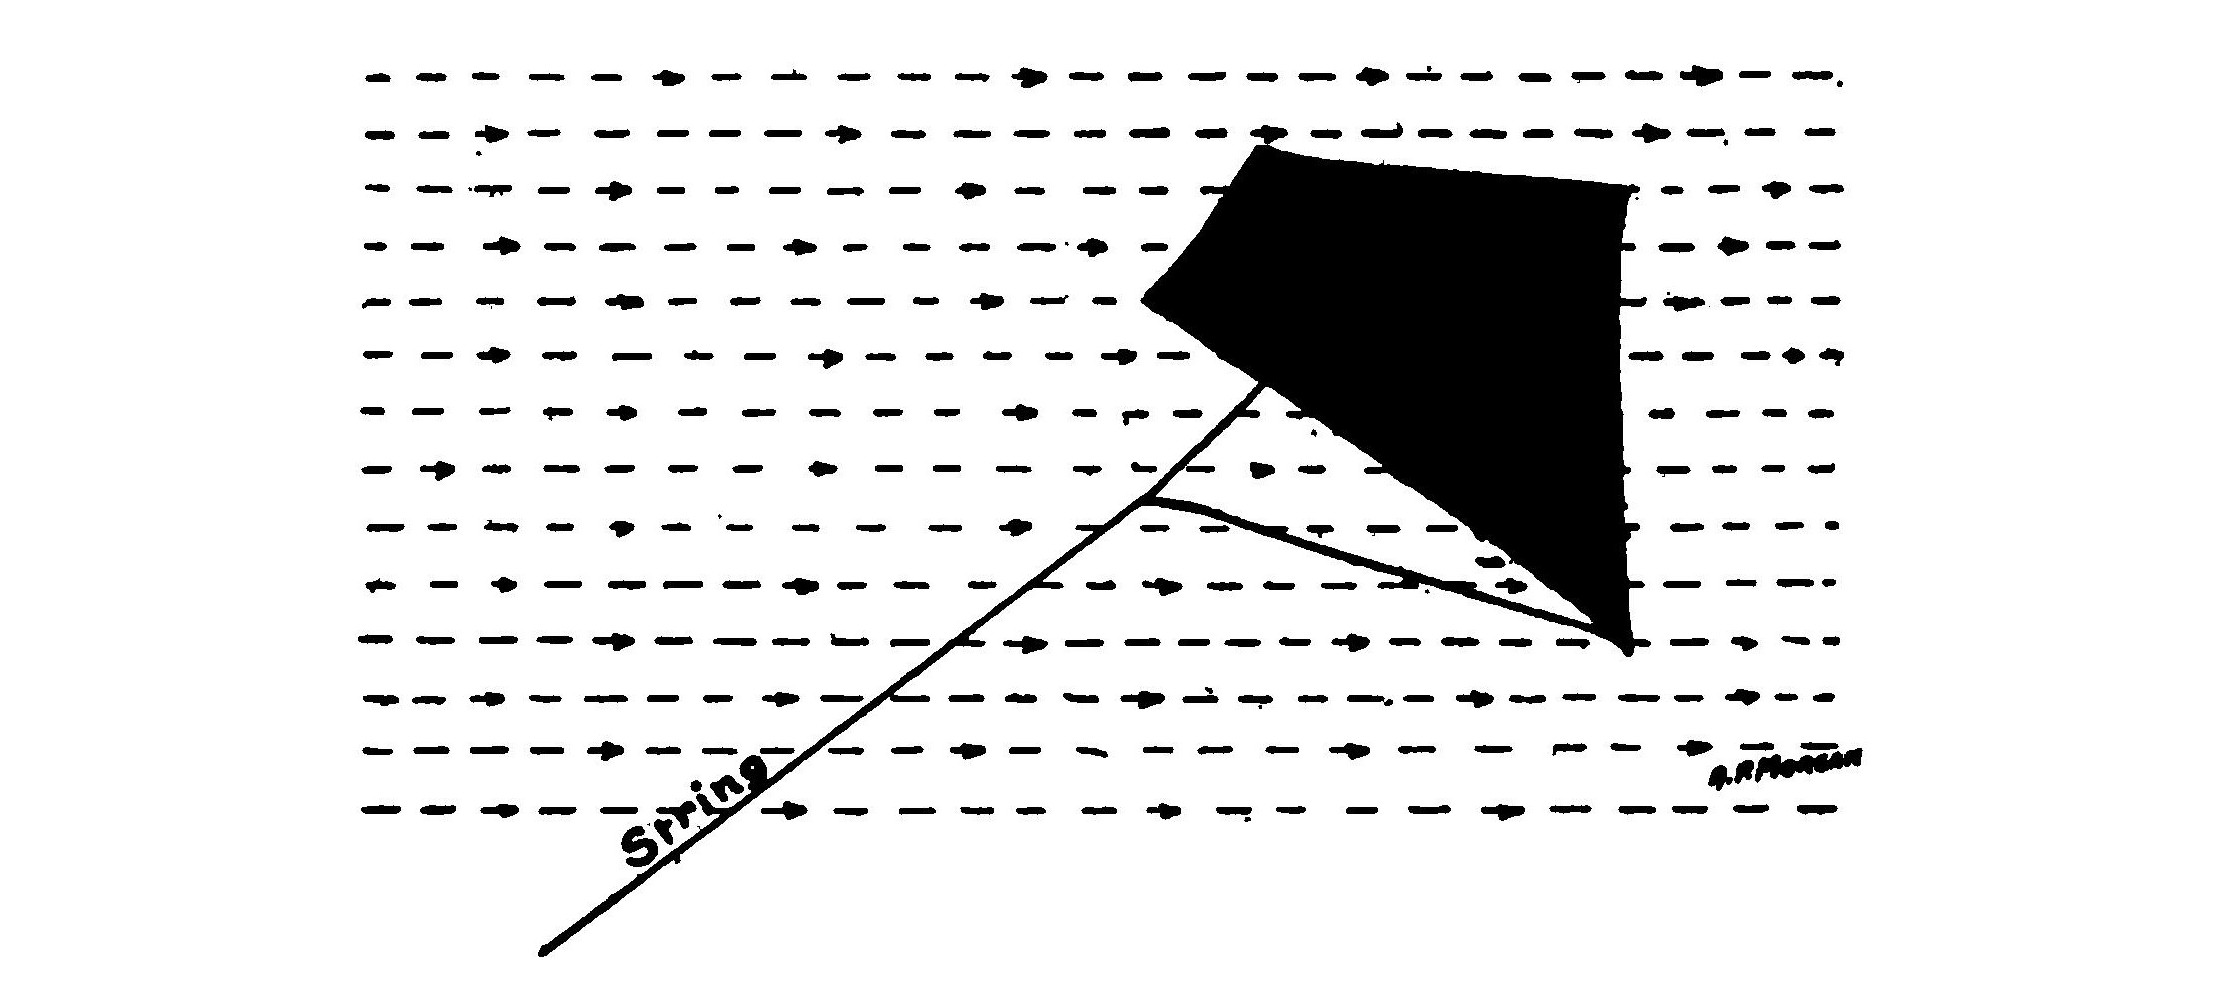 FIG. 1. Diagram showing a kite held in the air by the action of a wind.